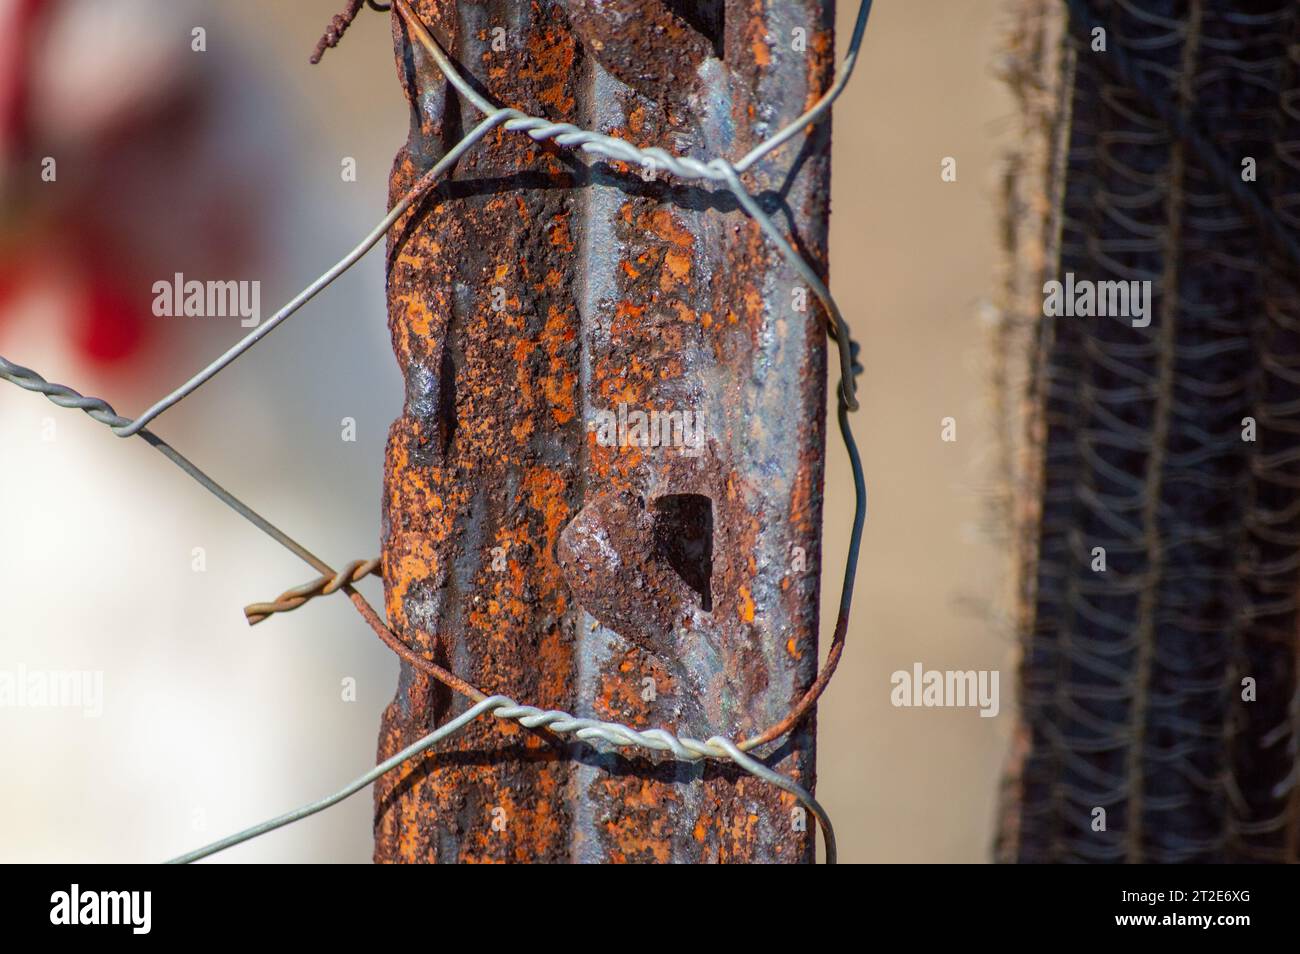 An old fence pole used for a chicken coop. The fence pole shows the effects of weathering and decay on rural structures Stock Photo